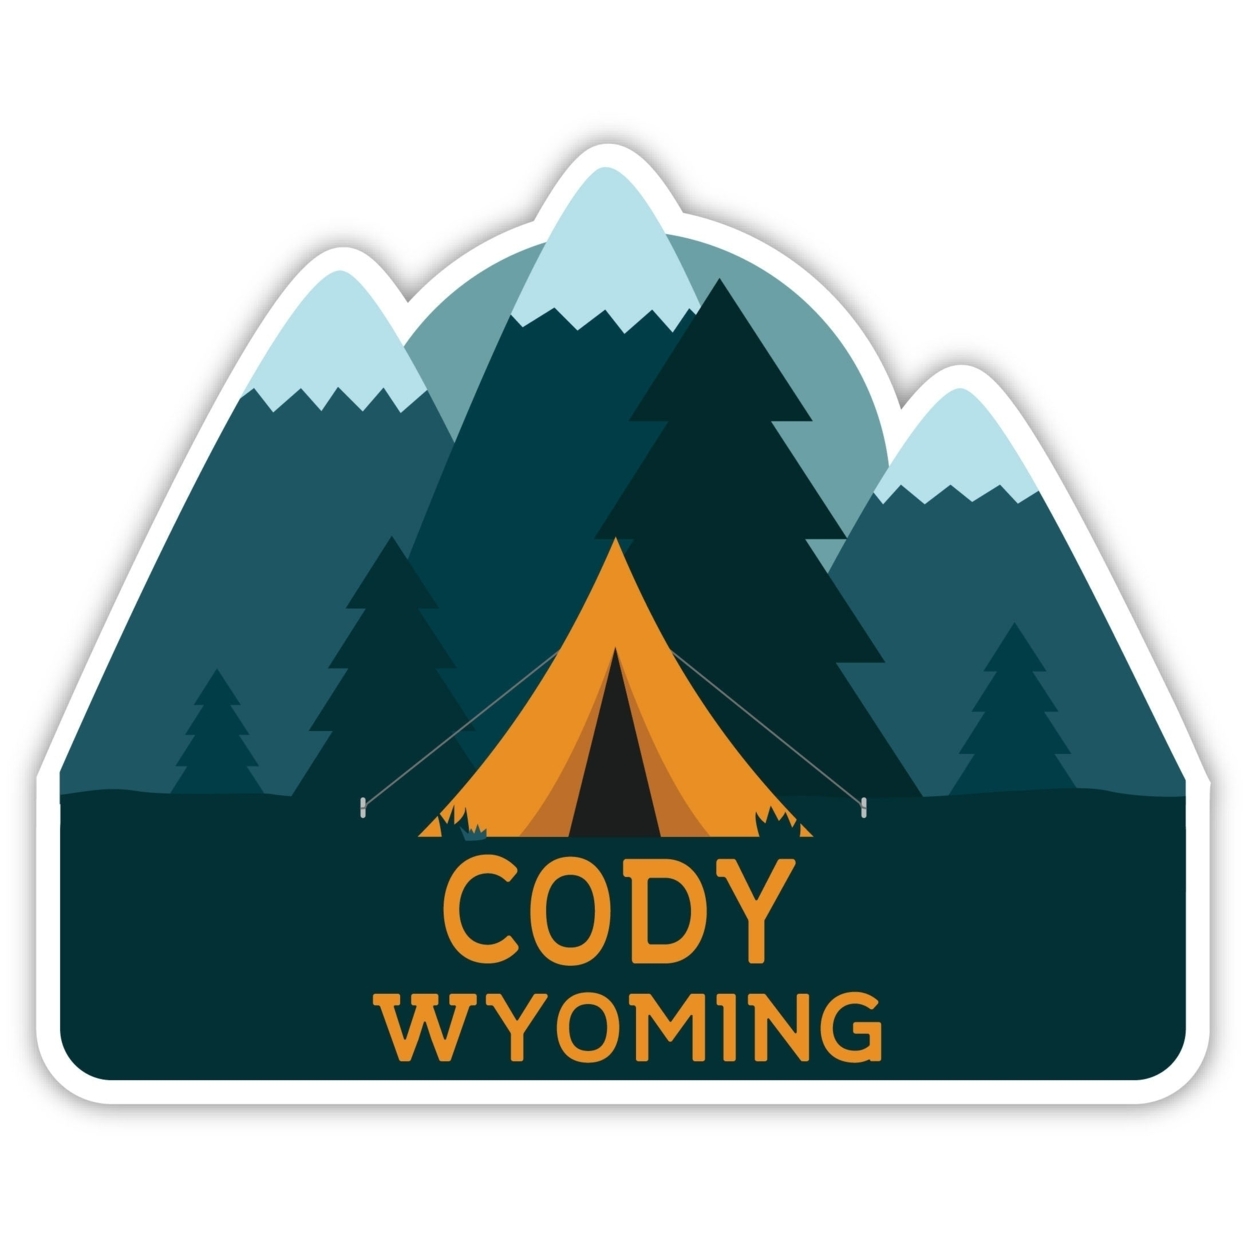 Cody Wyoming Souvenir Decorative Stickers (Choose Theme And Size) - Single Unit, 2-Inch, Tent